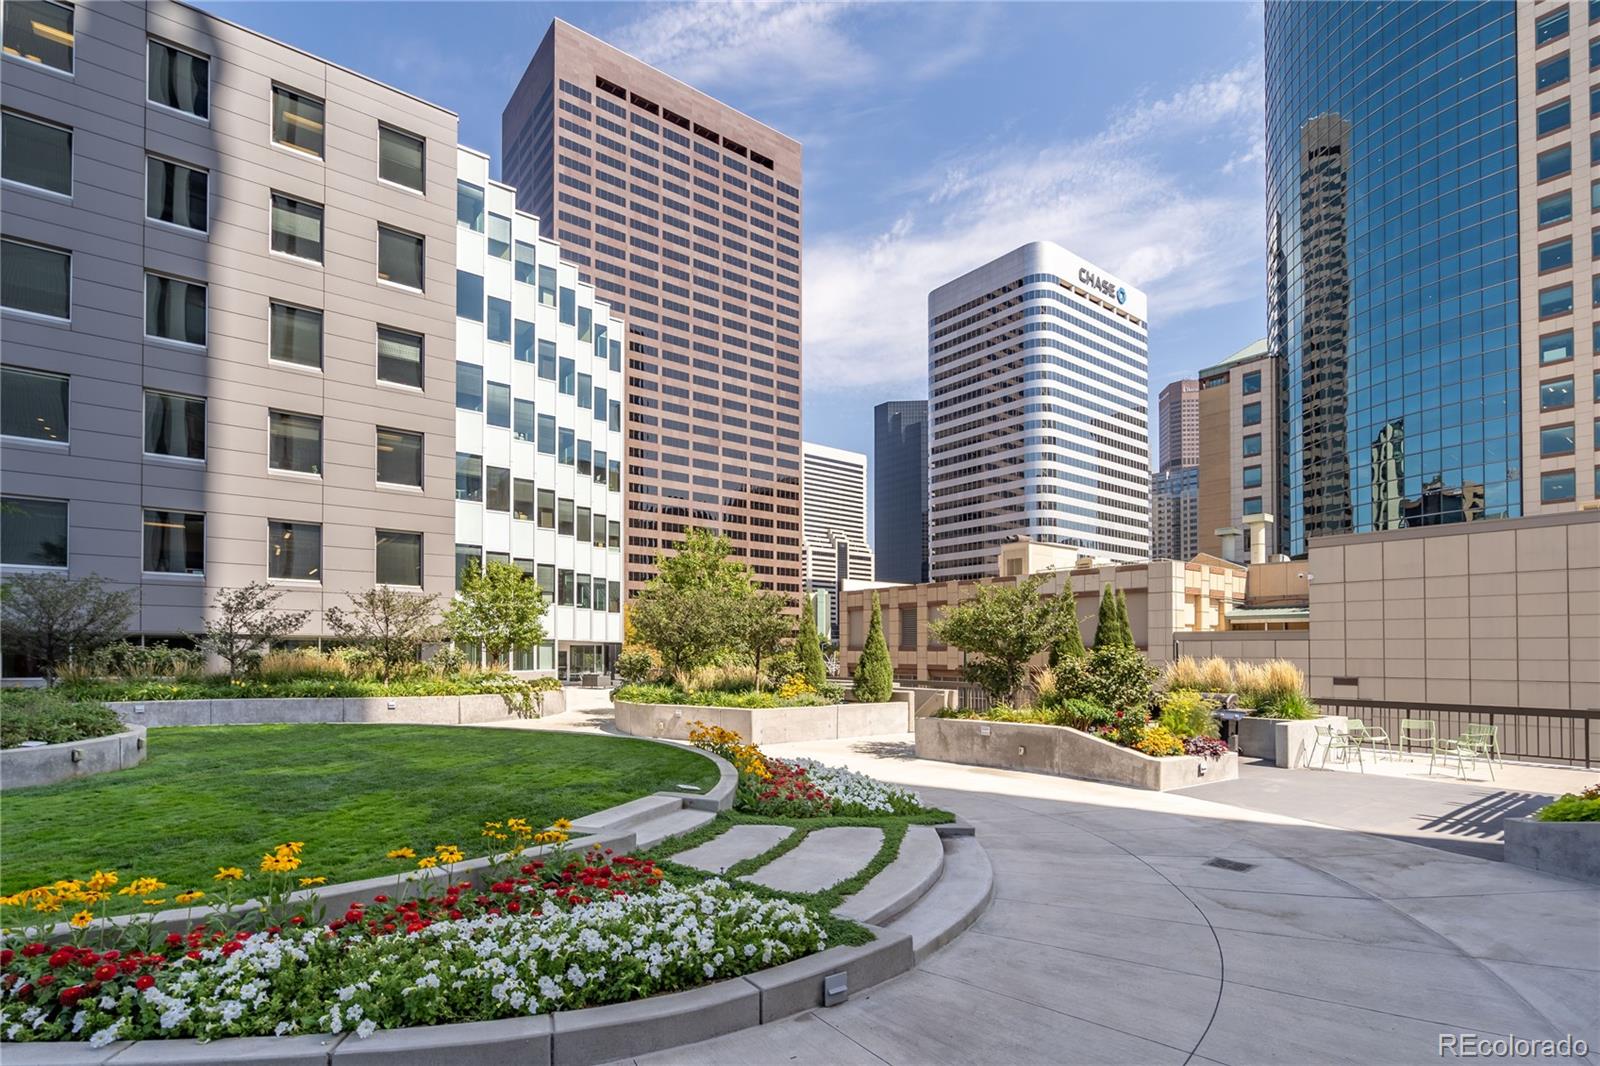 The view outside of the Barclay downtown Denver condos, with lush, colorful landscaping and several tall buildings.